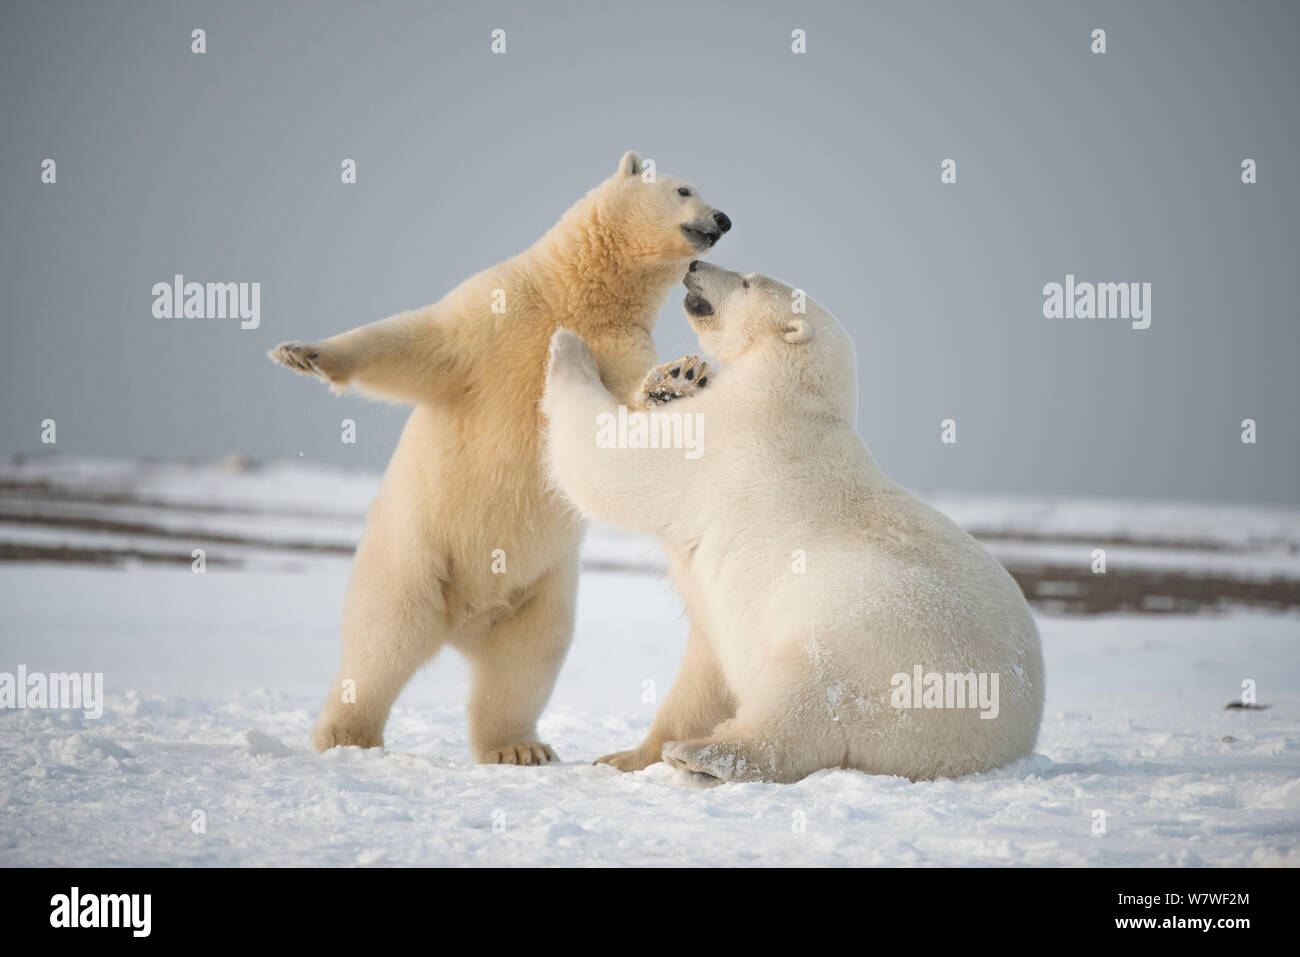 Polar bear (Ursus maritimus) pair of young bears playing on newly formed pack ice during autumn freeze up, along the eastern Arctic coast of Alaska, Beaufort Sea, September Stock Photo